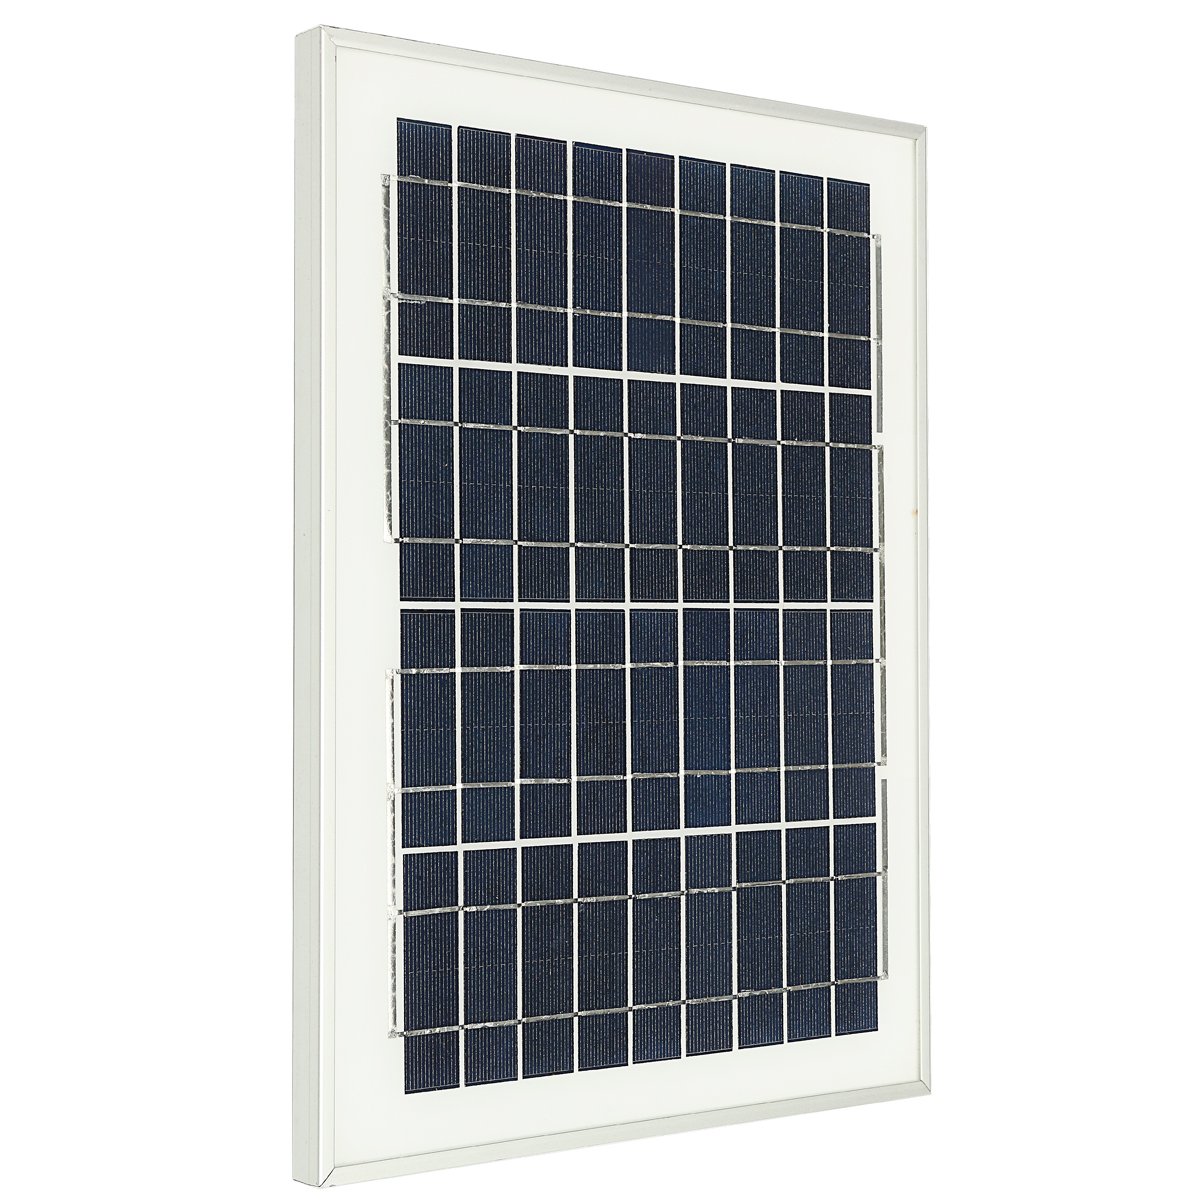 18V 10W Solar Panel For Outdoor Fountain Pond Pool Garden Submersible Water Pump With Crocodile Thre 2